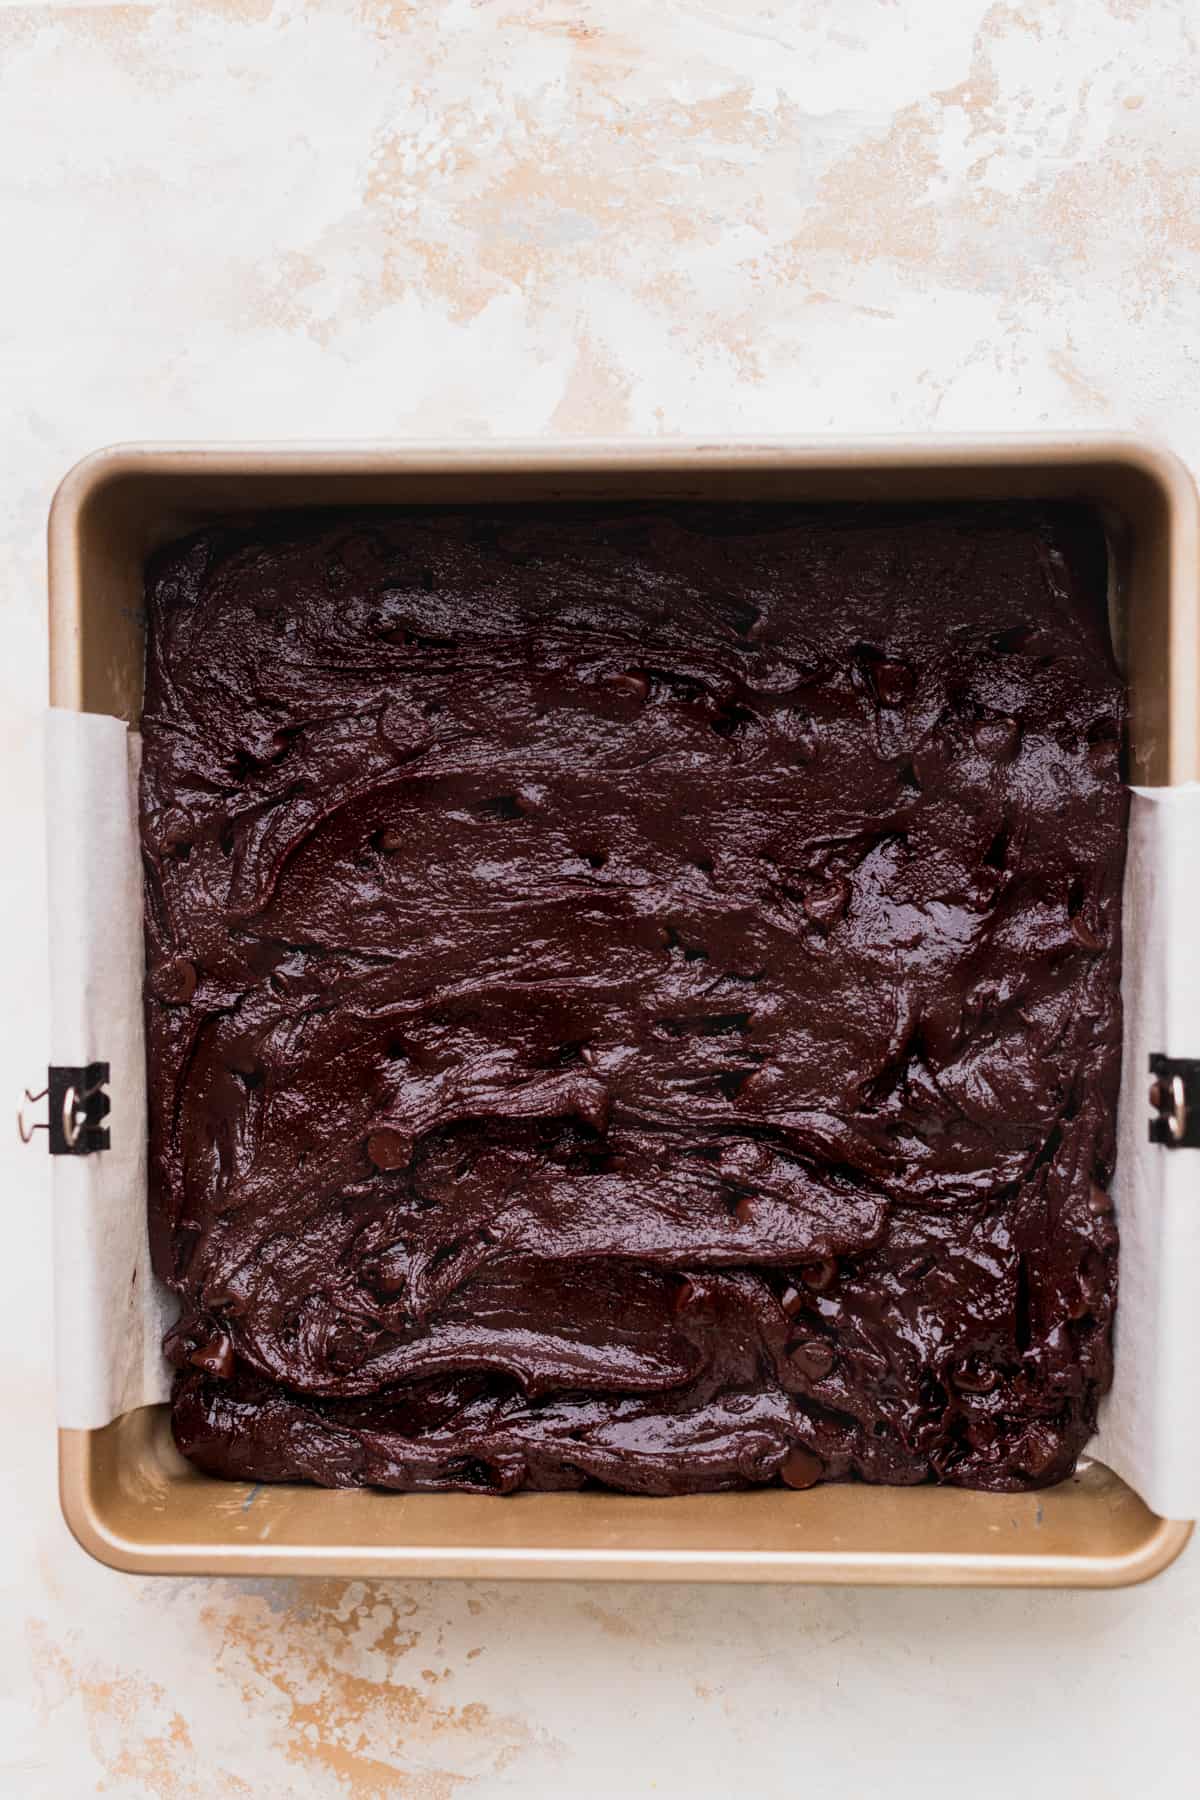 Brownie batter in a tin.